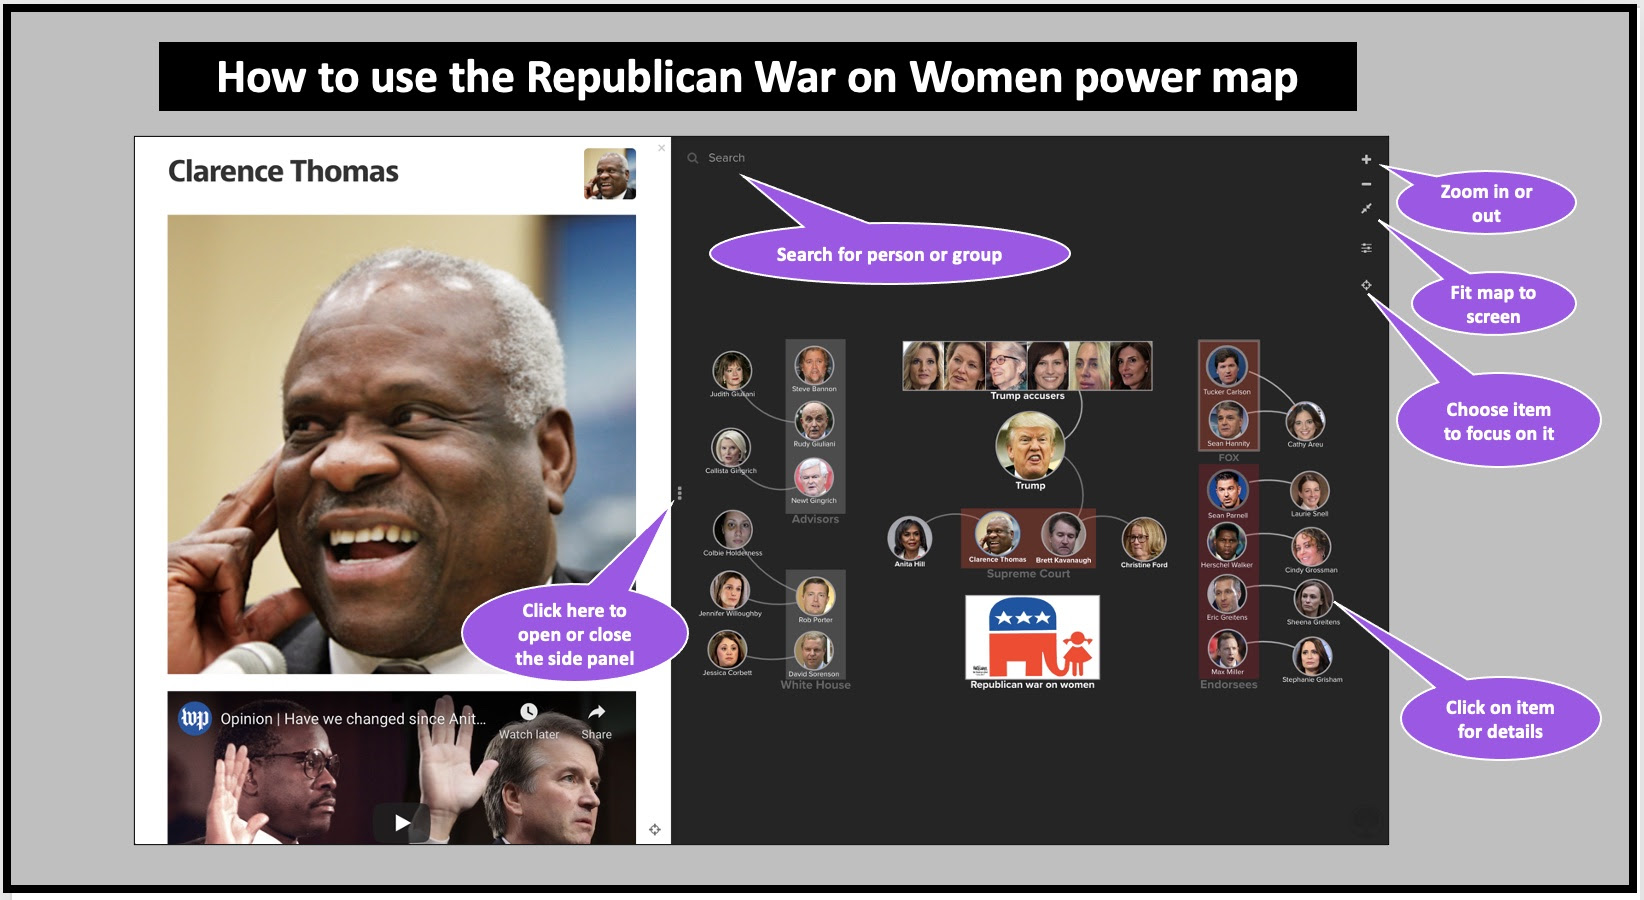 How to use the Republican War on Women power map